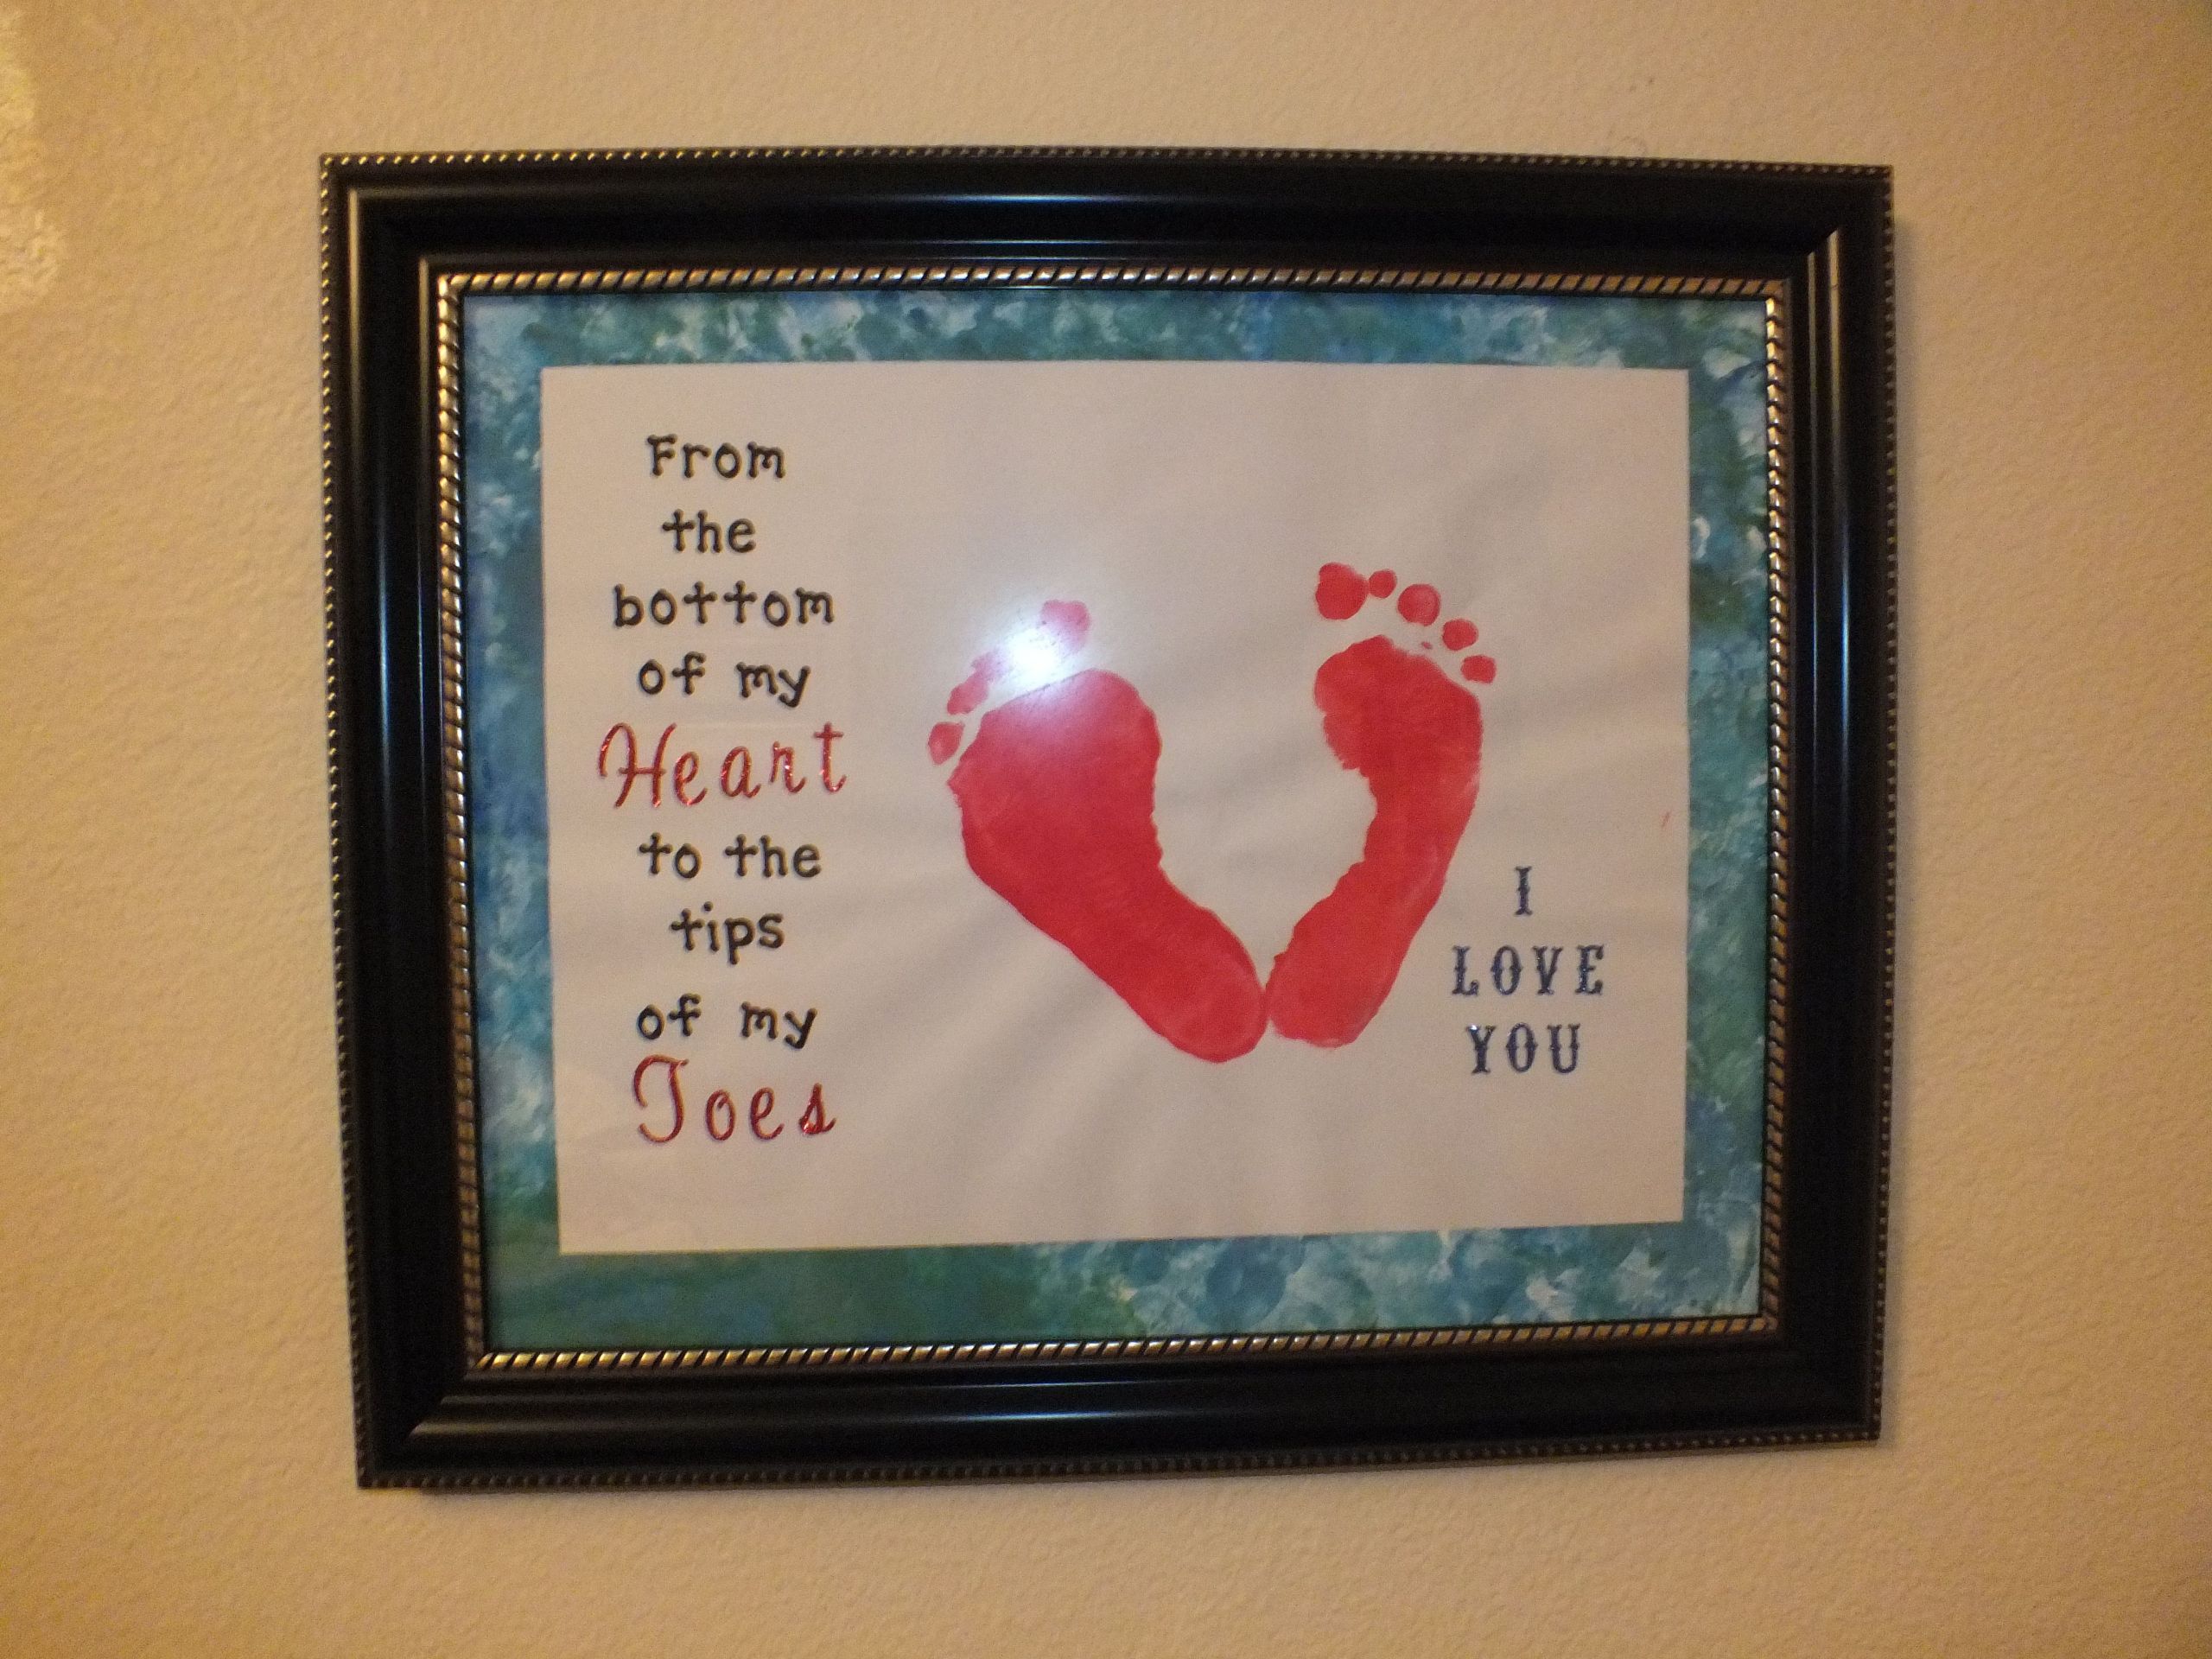 Father Daughter Valentine Gift Ideas
 This is the project my daughter did for Daddy for